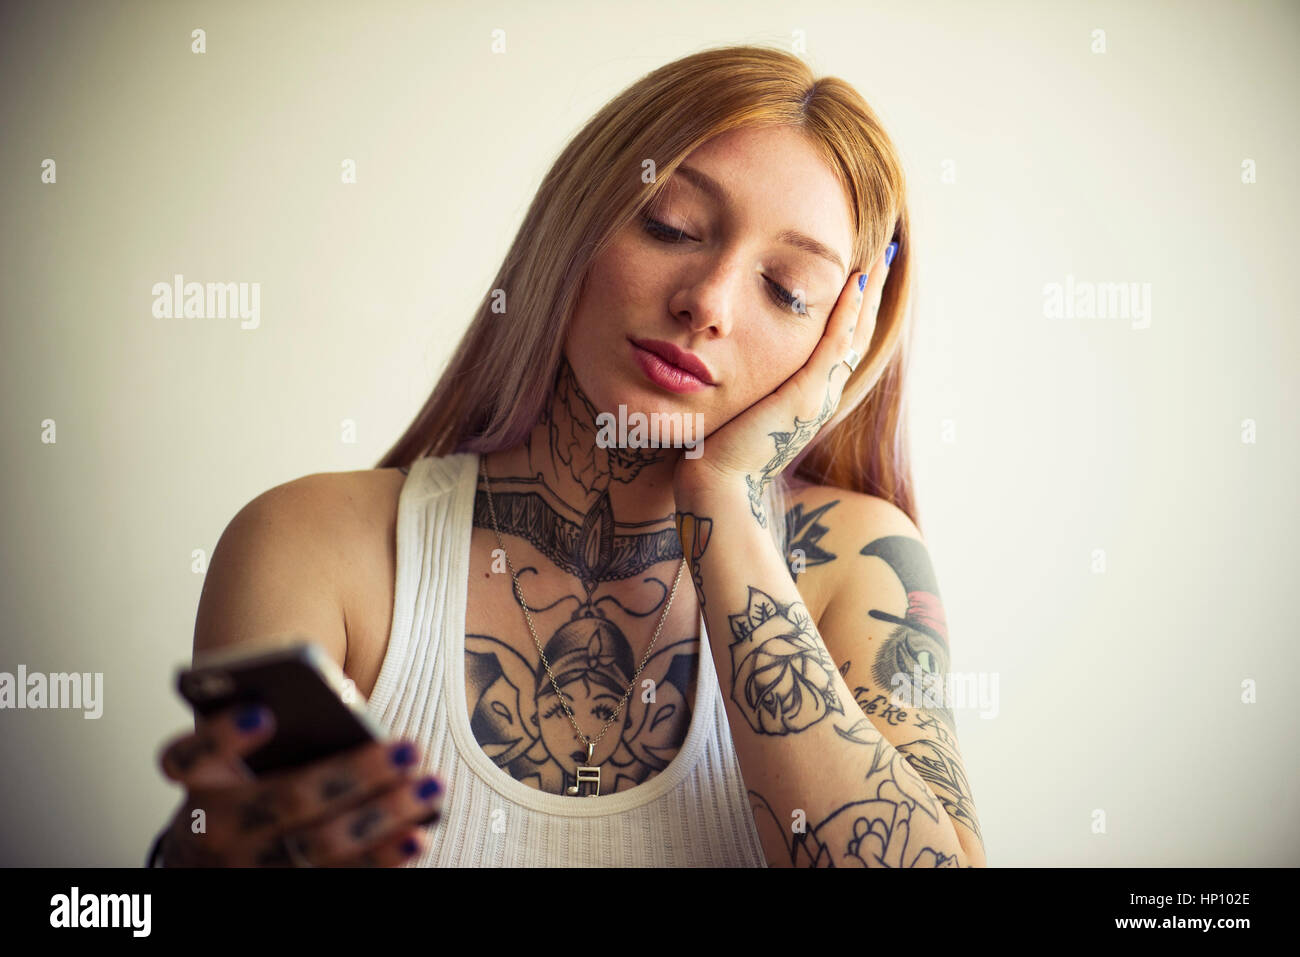 Tattooed Woman using smartphone Banque D'Images